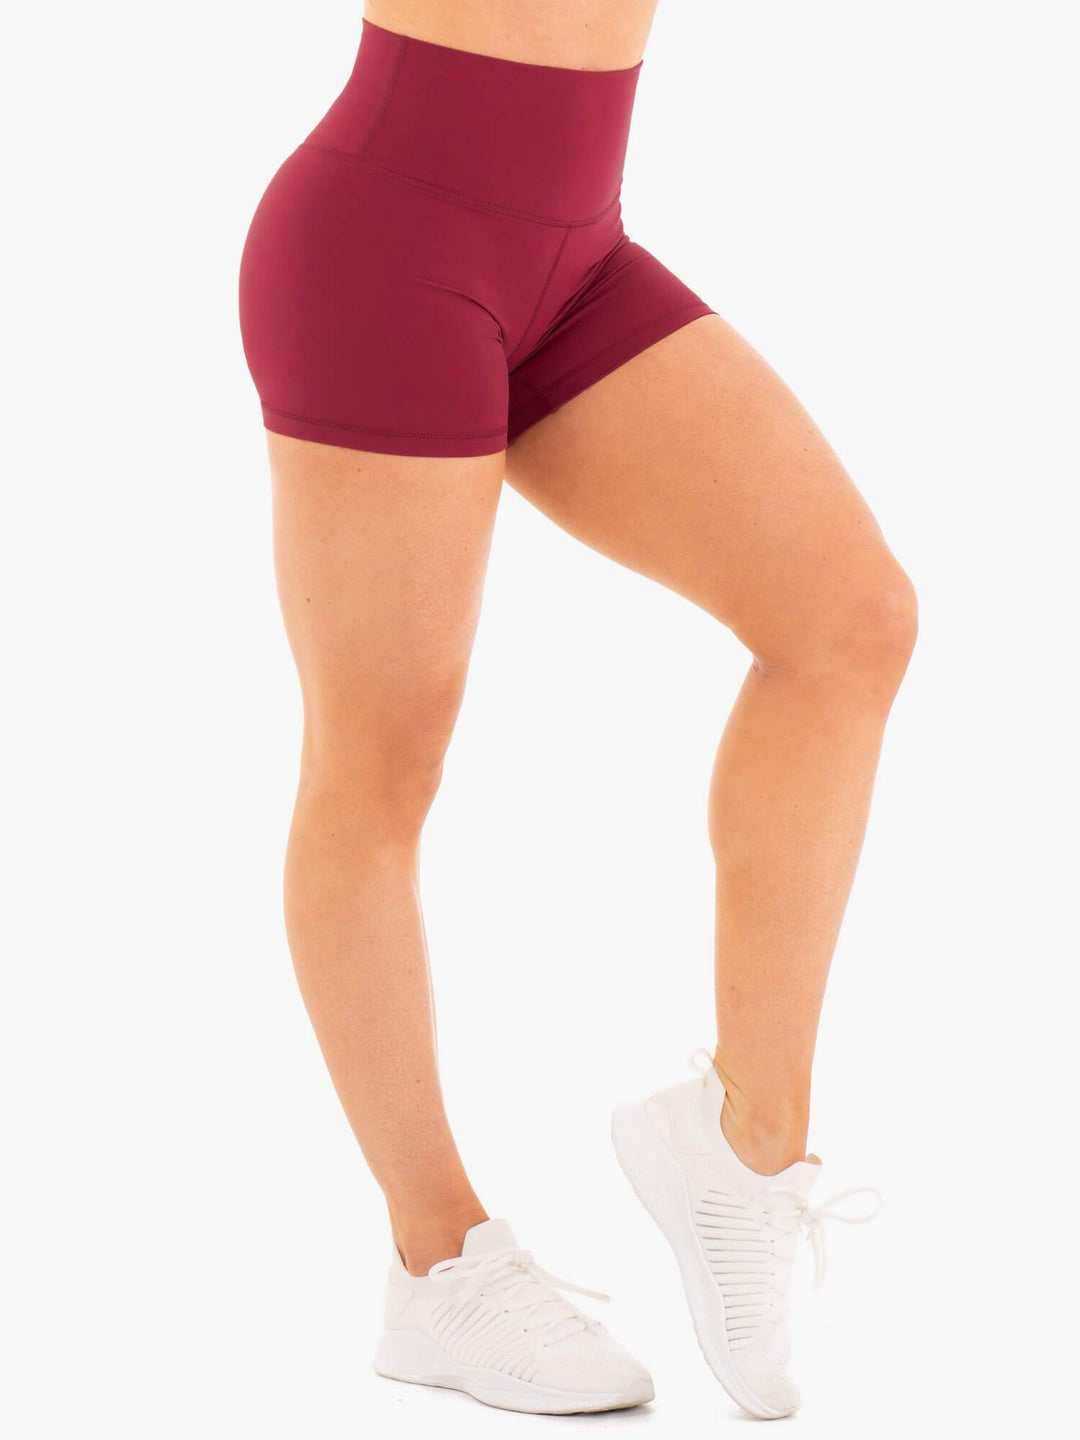 NKD High Waisted Shorts - Berry Red Clothing Ryderwear 